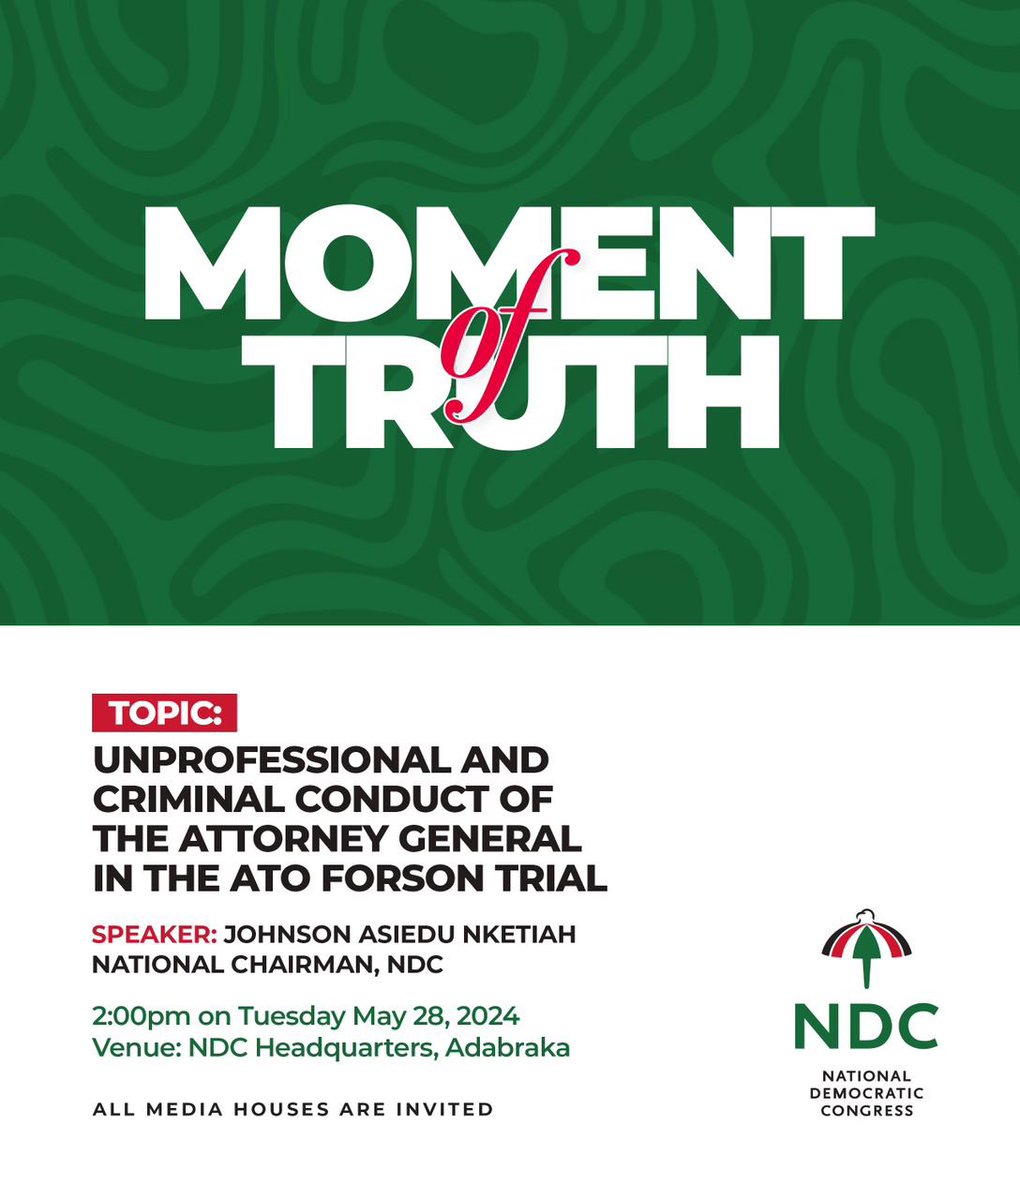 The much-anticipated press conference of the NDC on the AG’s unprofessional and criminal conduct in the Ato Forson trial comes off tomorrow, Tuesday, 28th May, 2024. Don’t miss it 🔥🔥🔥